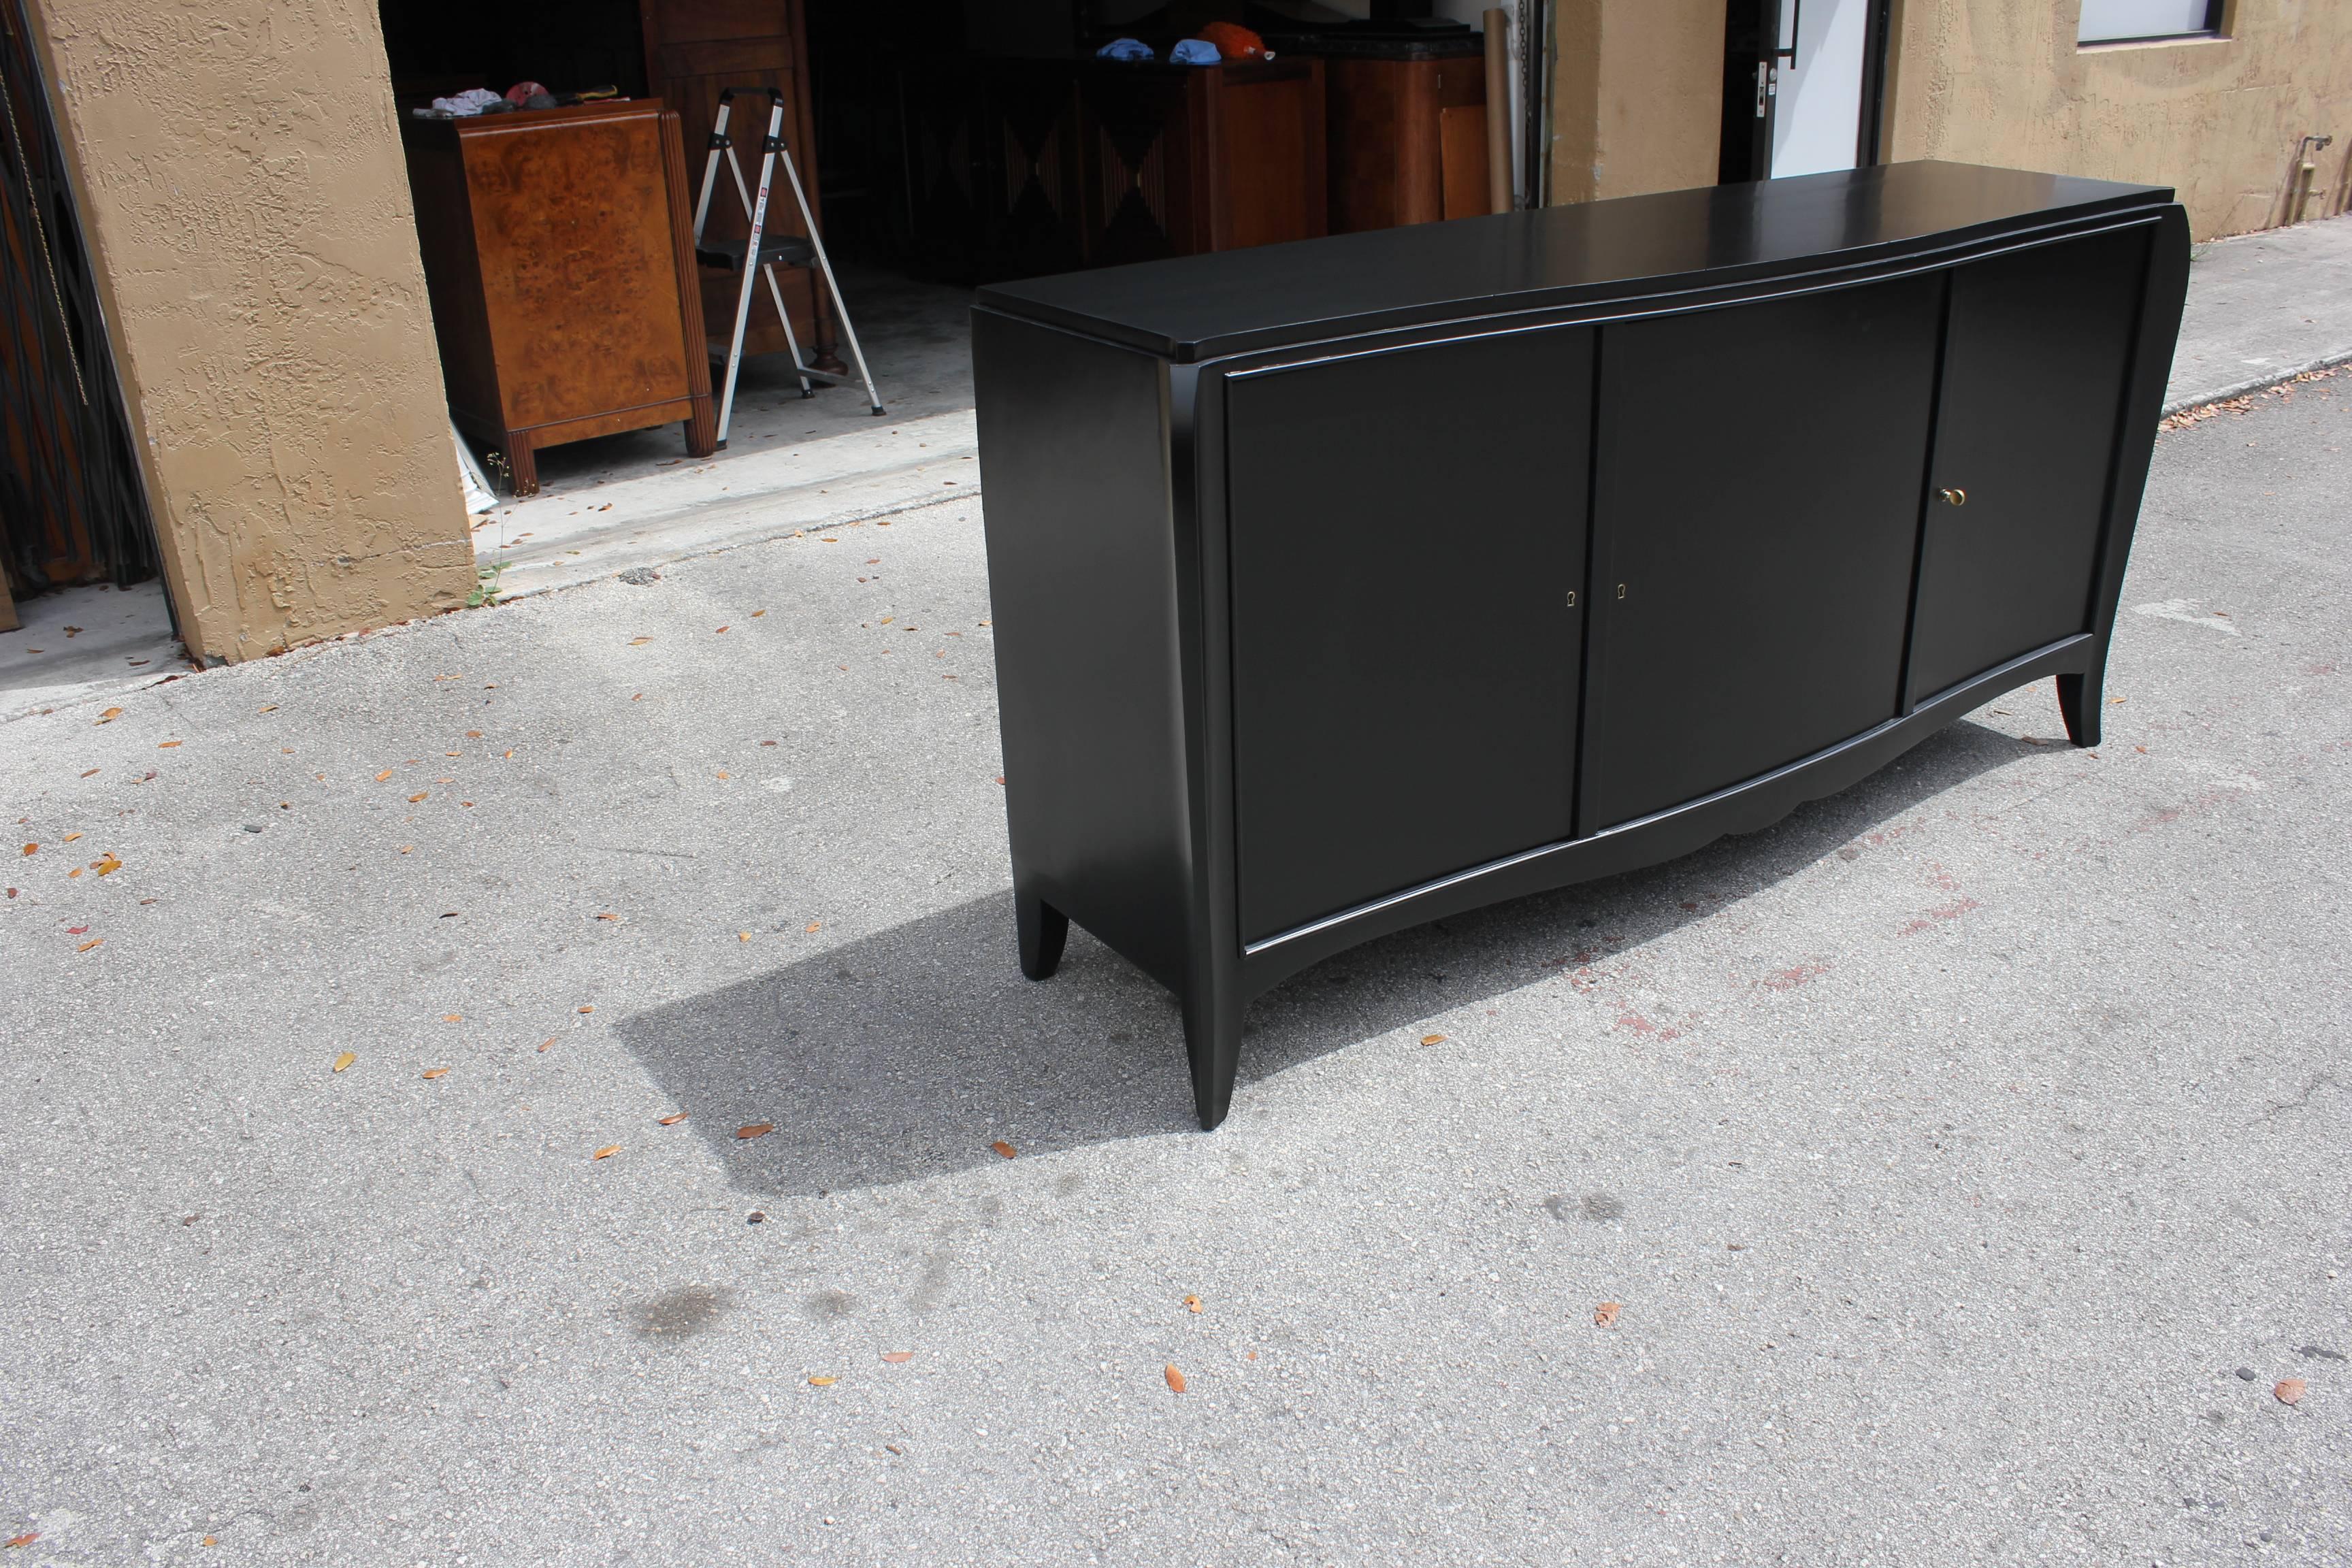 Beautifully French Art Deco, sideboard, buffet or bar or credenza ebonized finish, circa 1940s. Newly lacquered inside and out and the back too, with three drawers inside and shelves adjustable, and you can remove the shelves if you need more space,